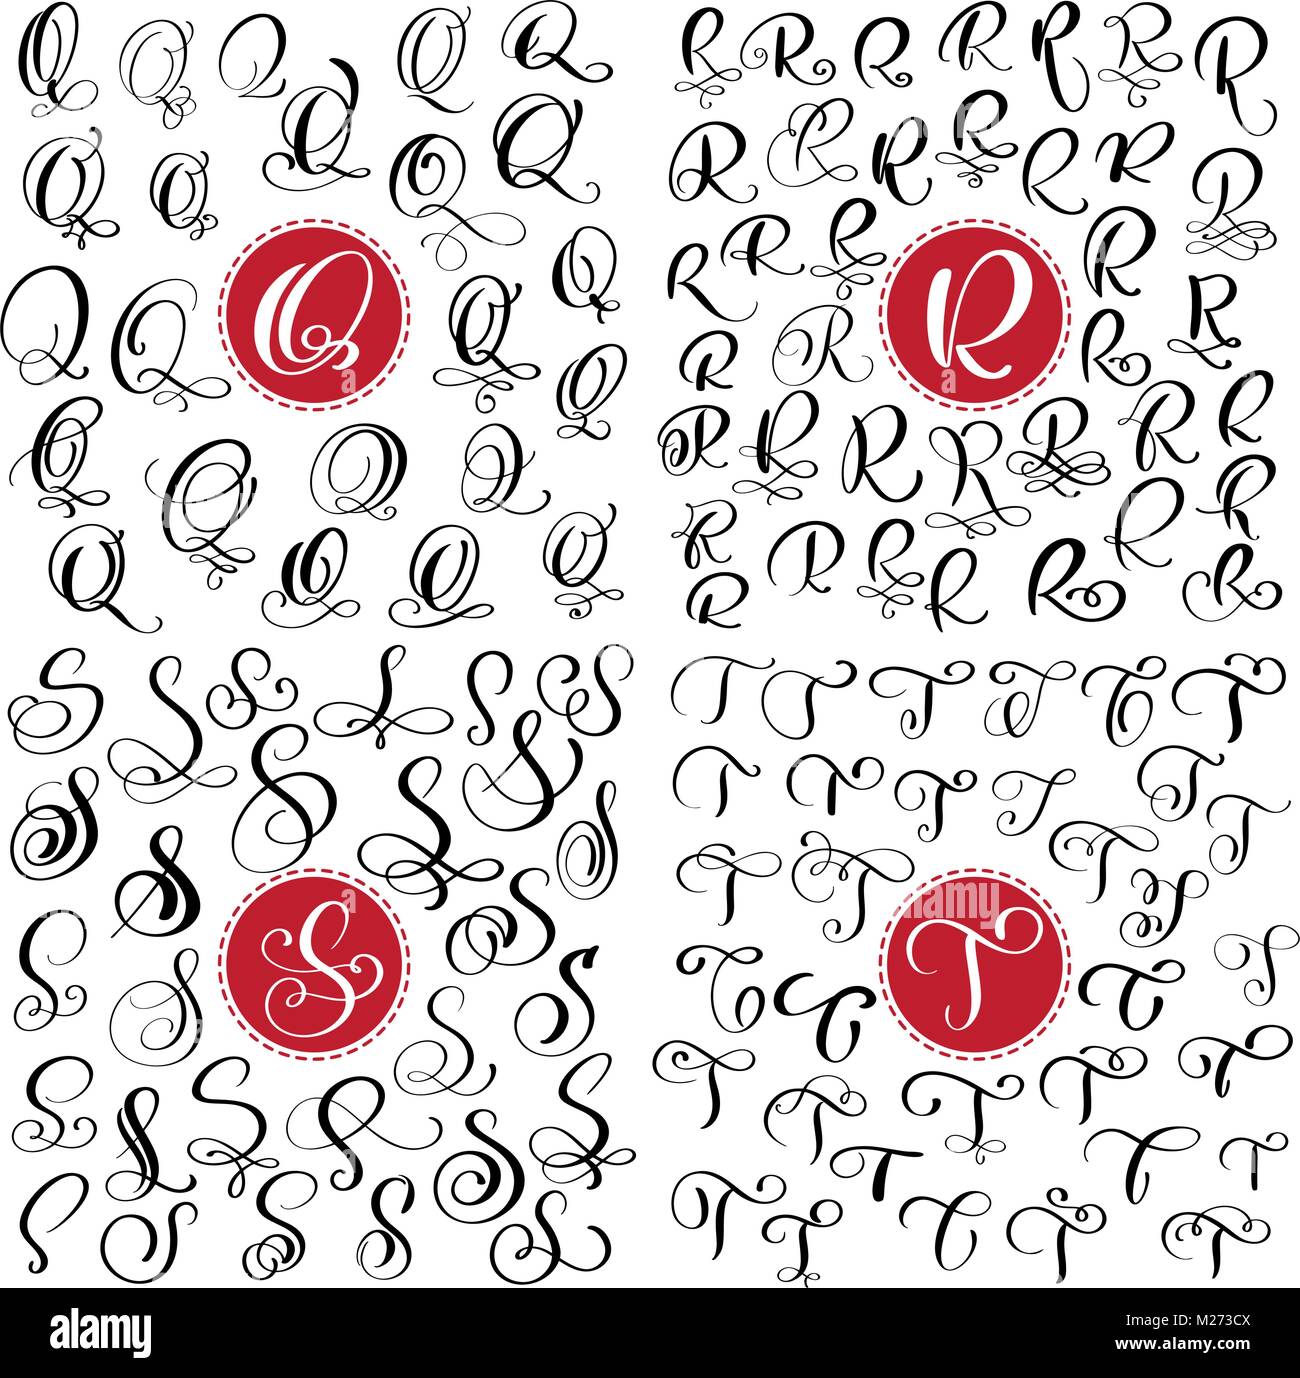 Set of Hand drawn vector calligraphy letter Q, R, S, T. Script font. Isolated letters written with ink. Handwritten brush style. Hand lettering for logos packaging design poster Stock Vector